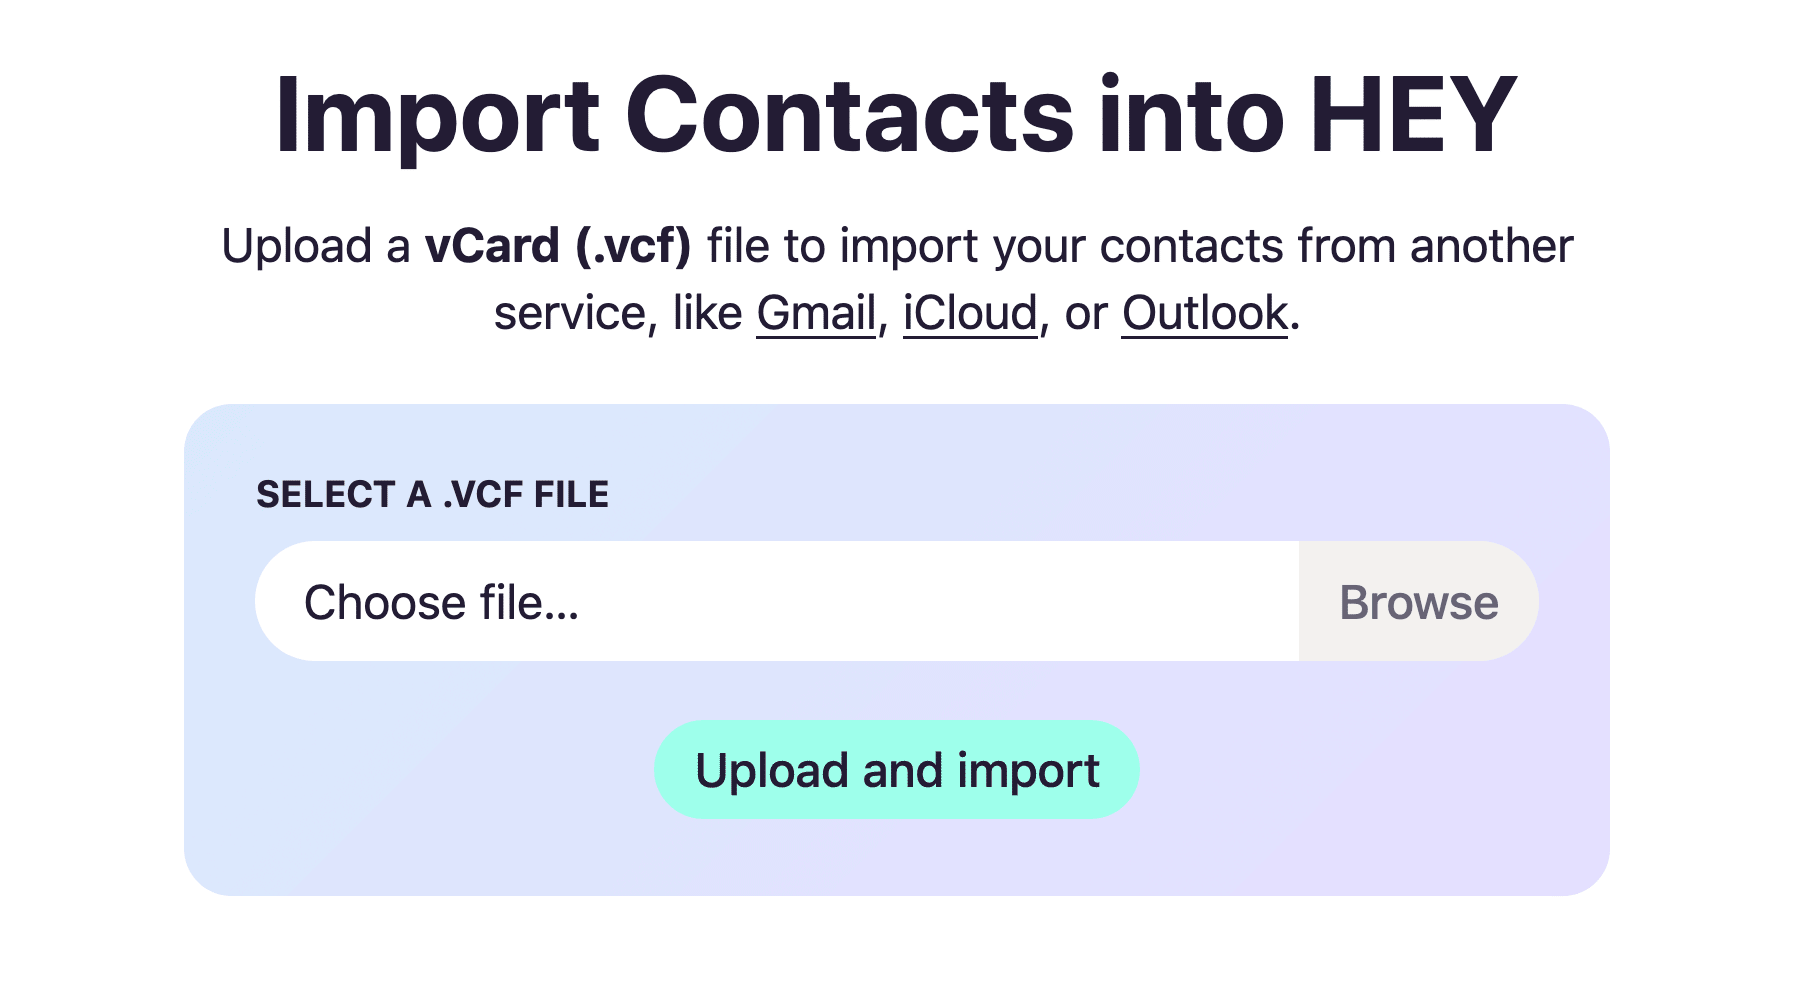 Importing your contacts in HEY